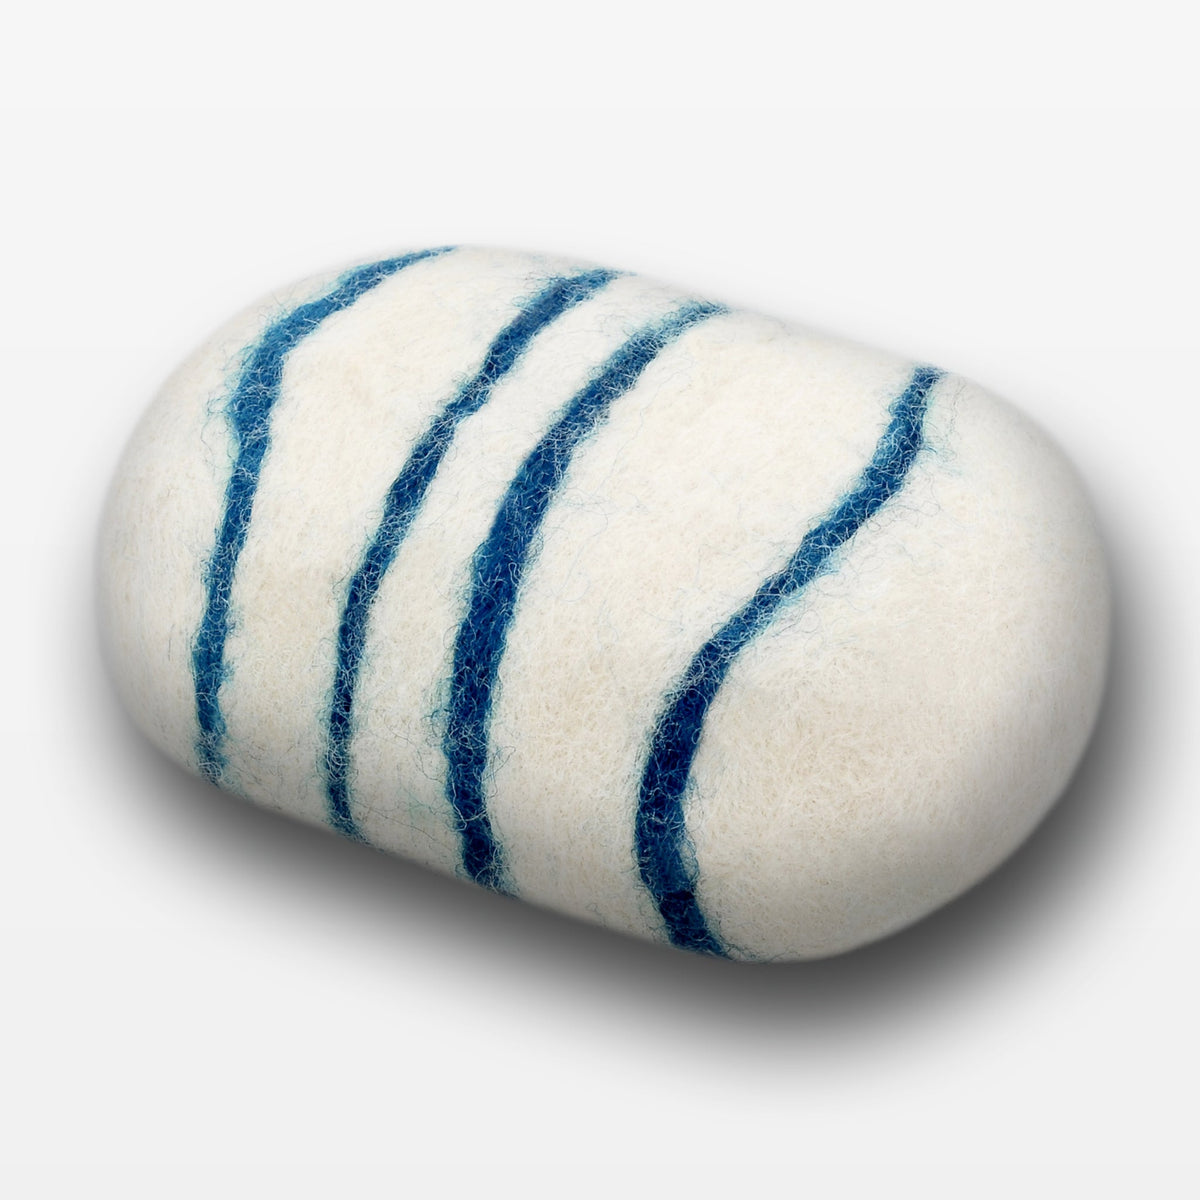 A close-up of a Fiat Luxe - Classic Bay Rum felted soap bar with three dark blue stripes, isolated on a white background. The texture of the soap appears soft and fibrous.